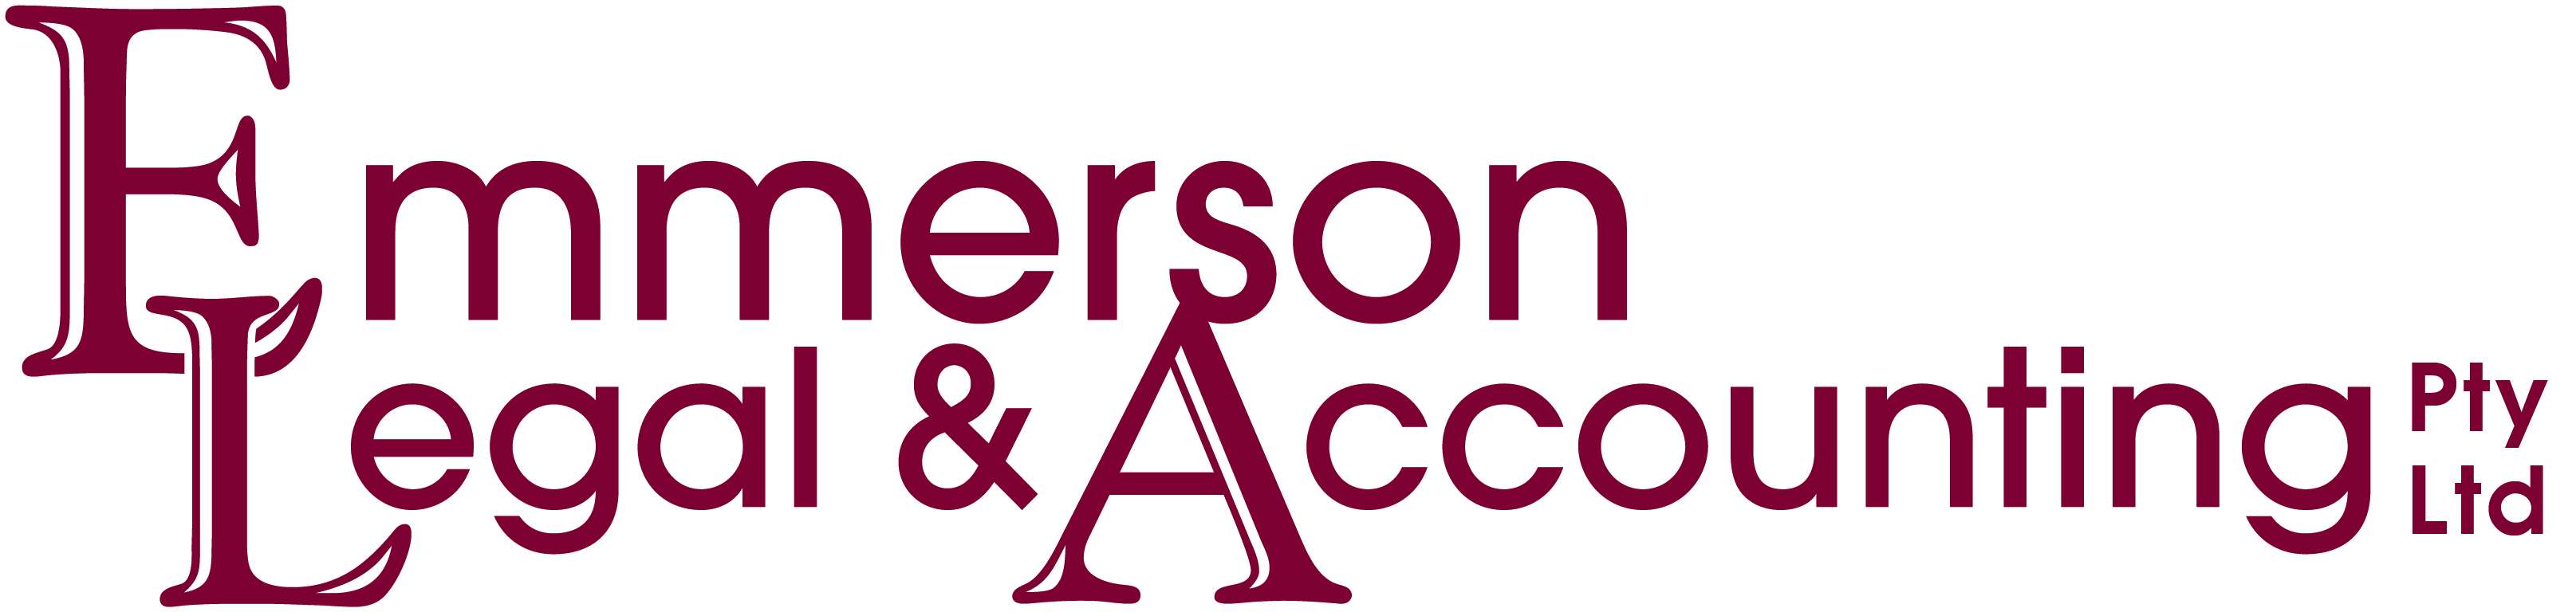 Emmerson Legal and Accounting Logo